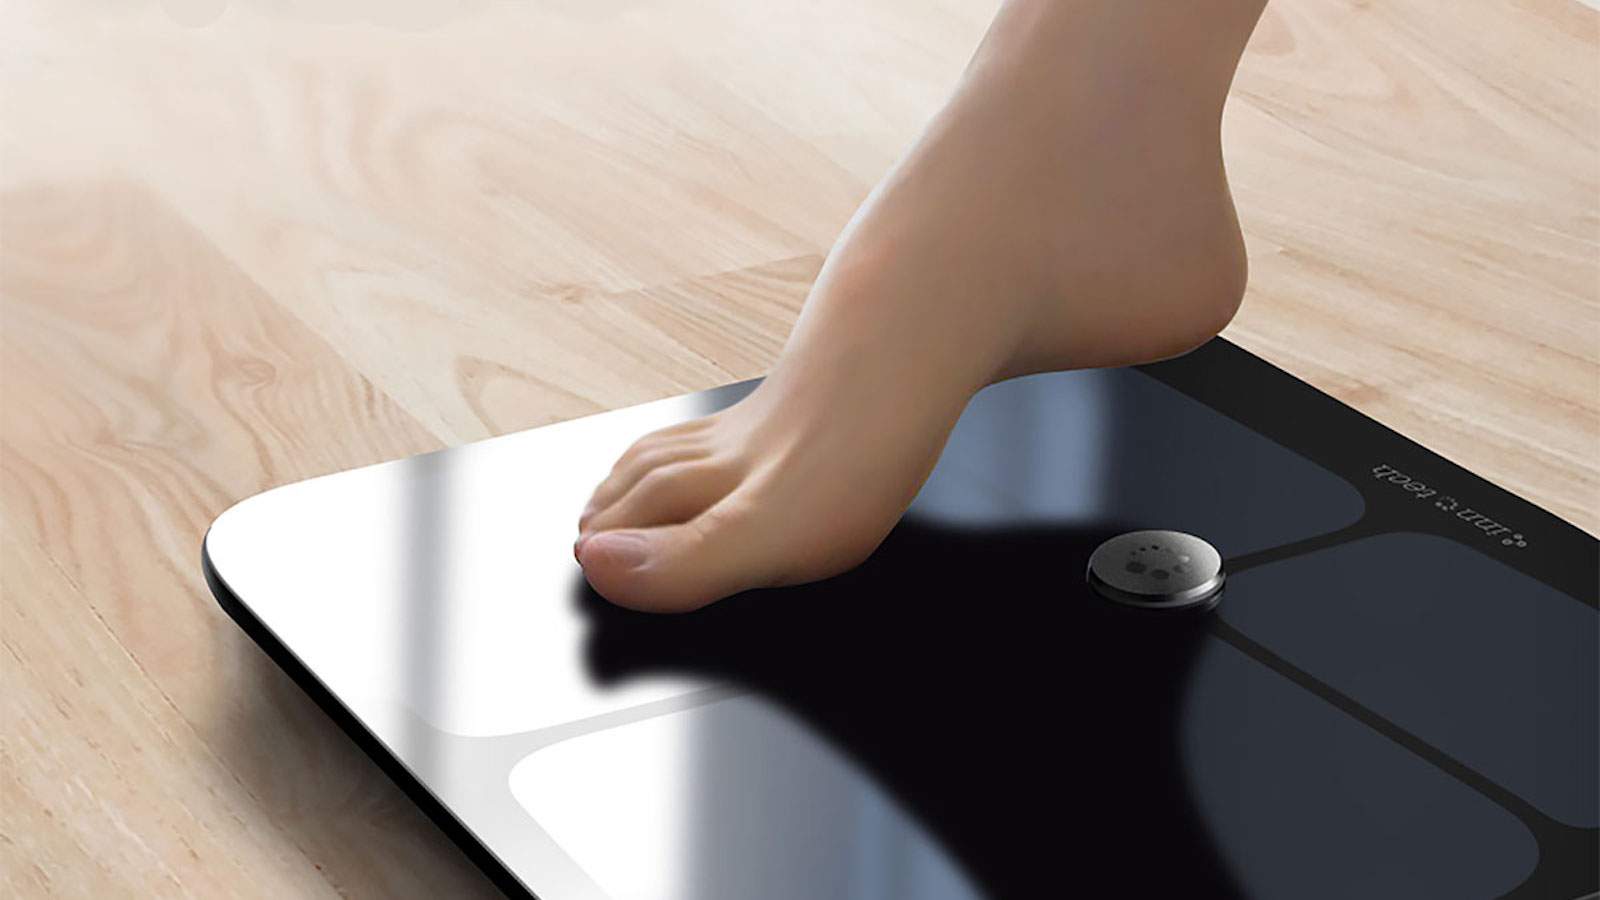 Hit your new year’s resolution fitness goals with this sleek smart scale